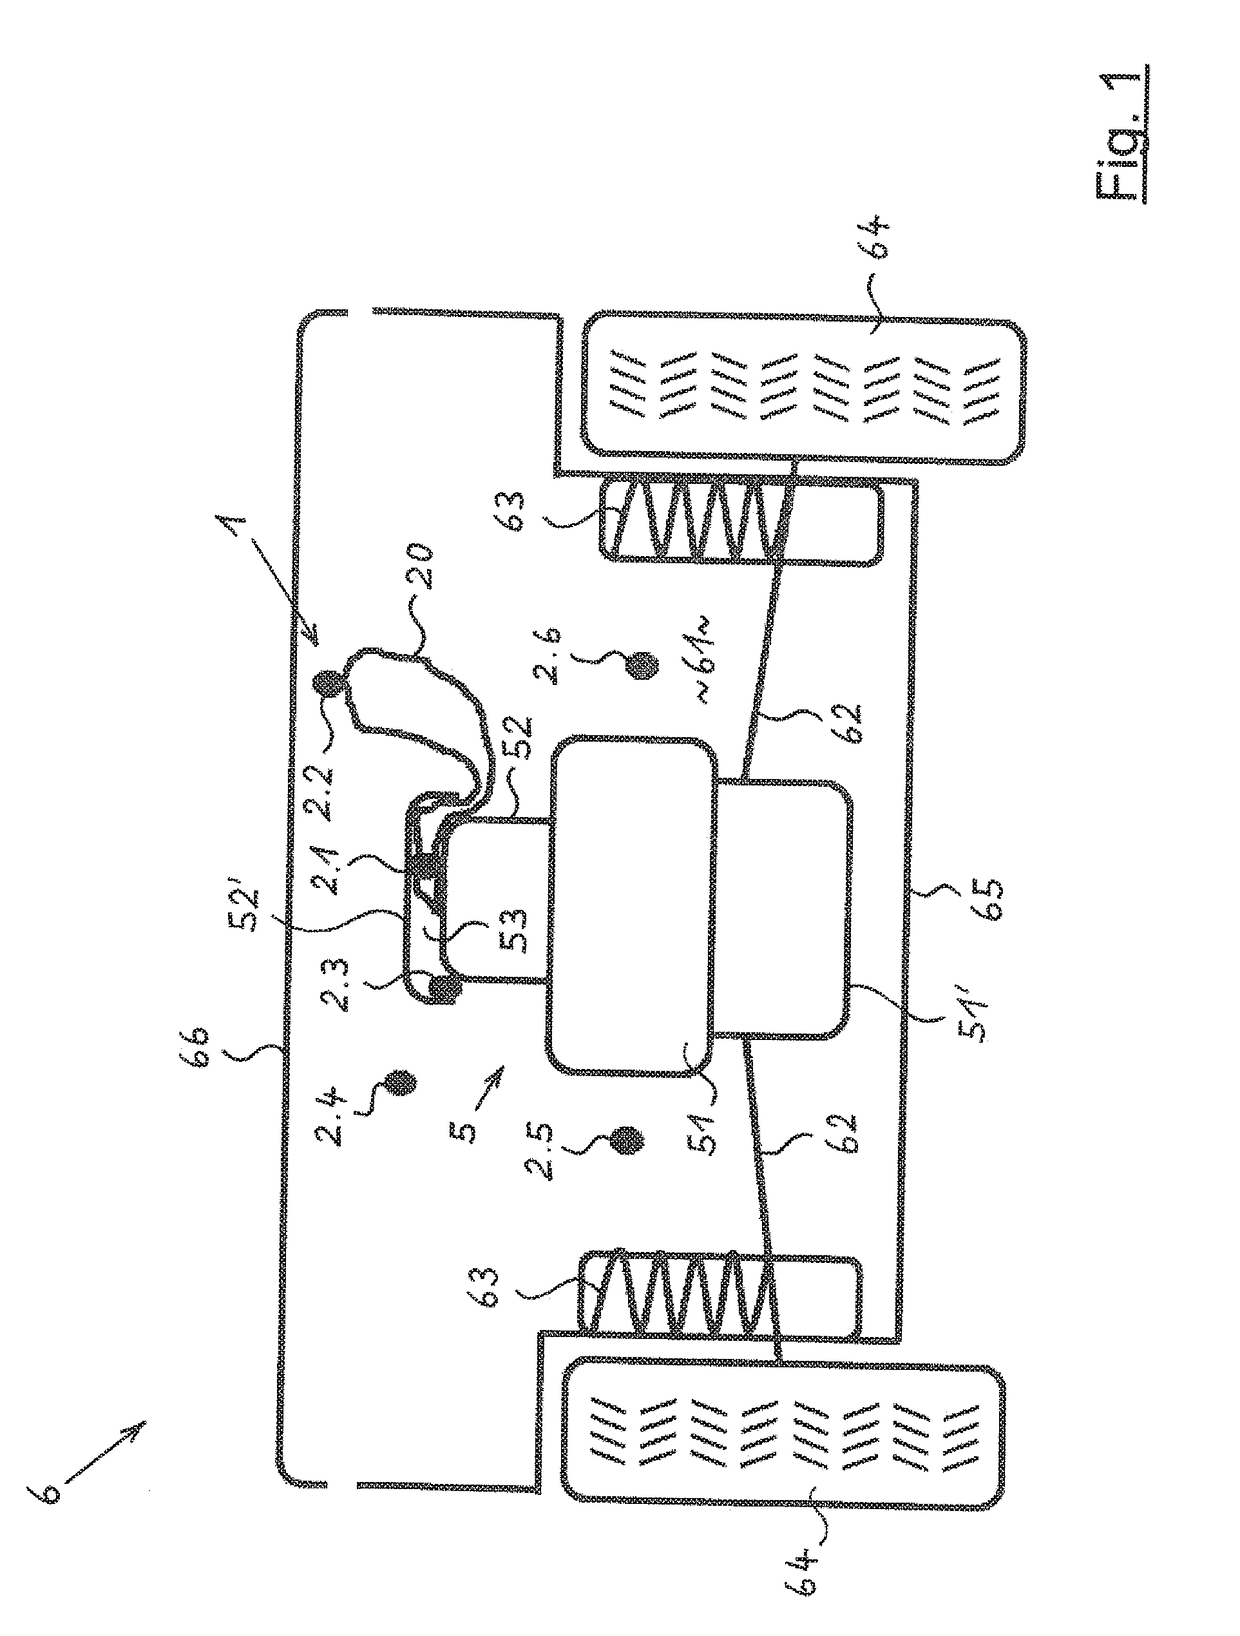 Method and device for monitoring the functioning of a crankcase ventilation system of an internal combustion engine